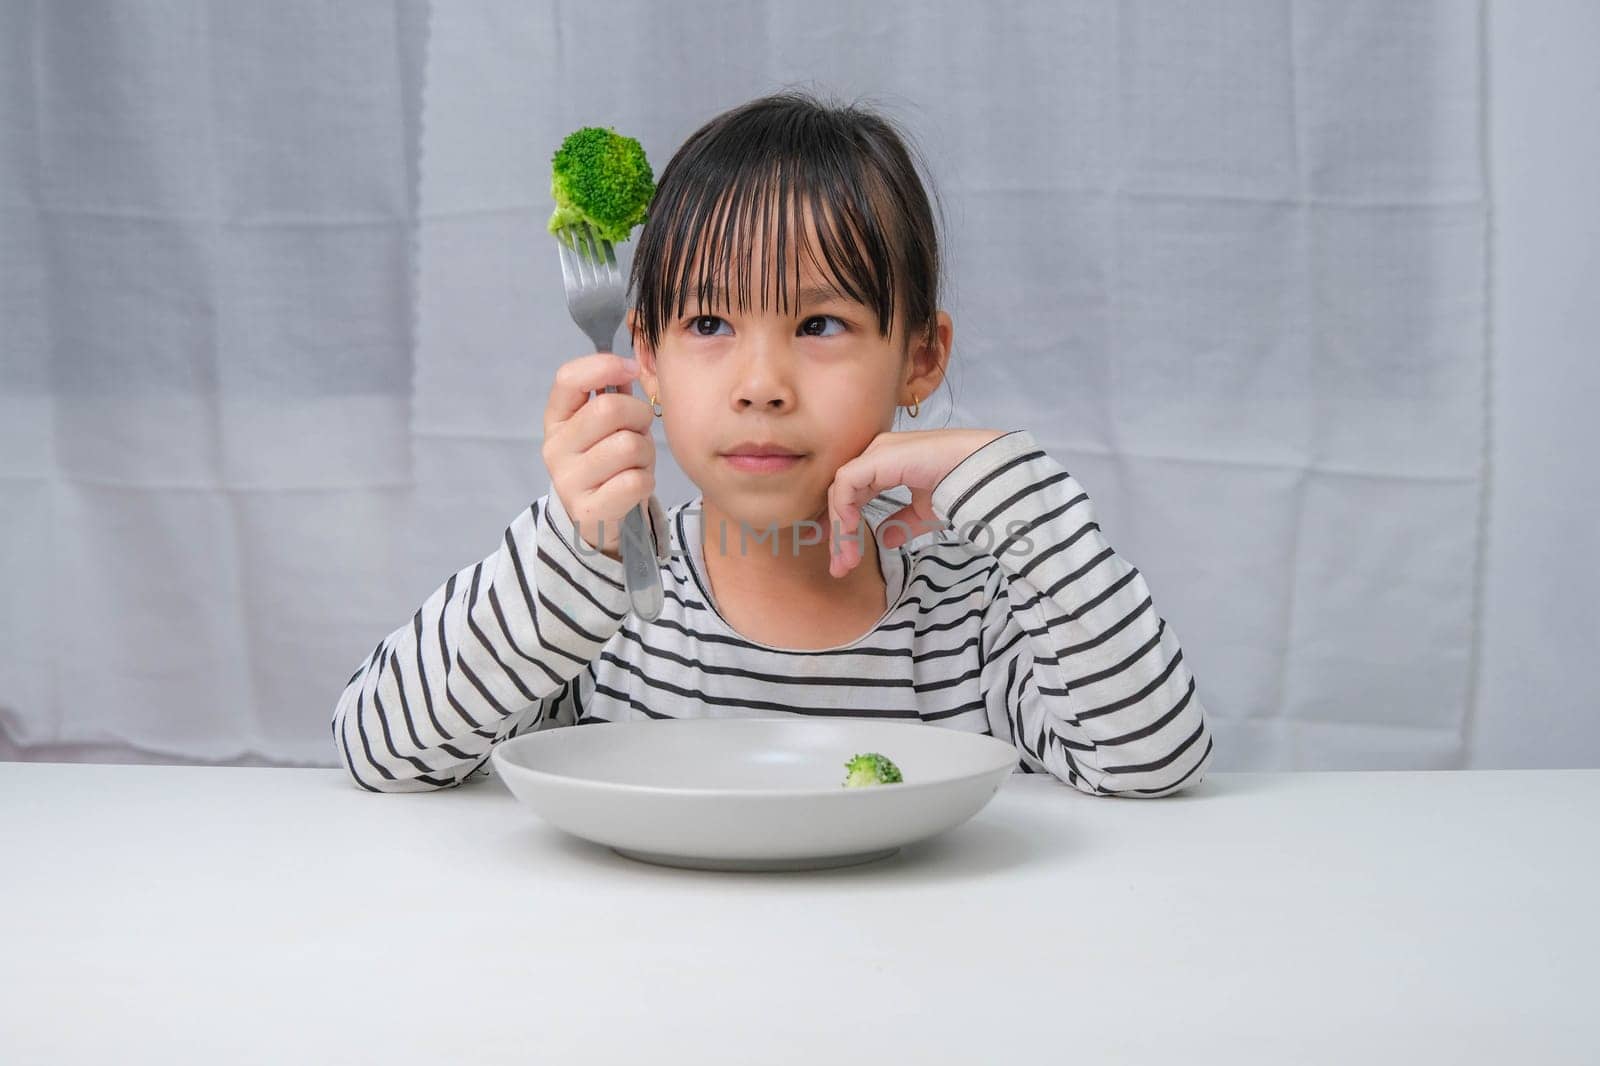 Children love to eat vegetables. Cute Asian girl eating healthy vegetables in her meal. Nutrition and healthy eating habits for children. by TEERASAK